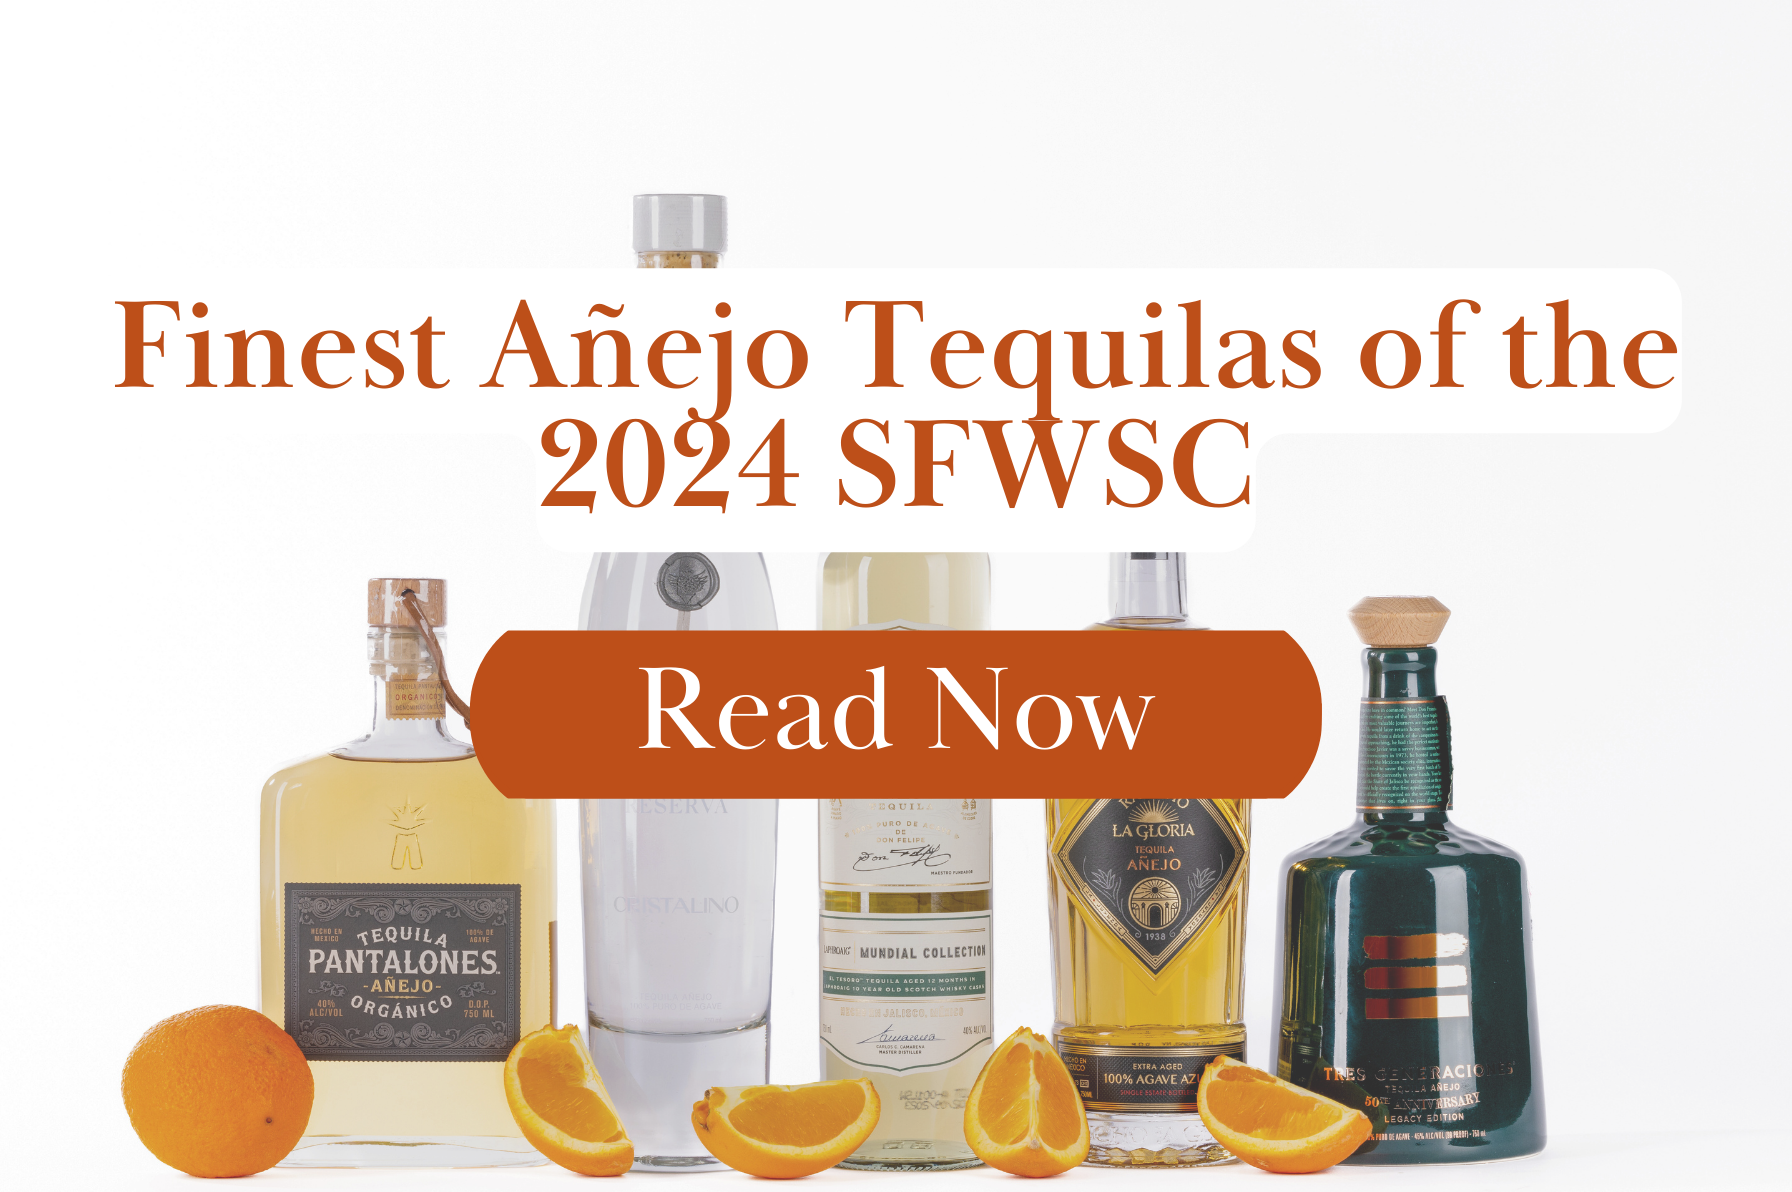 Best Anejo Tequila of the 2024 SFWSC